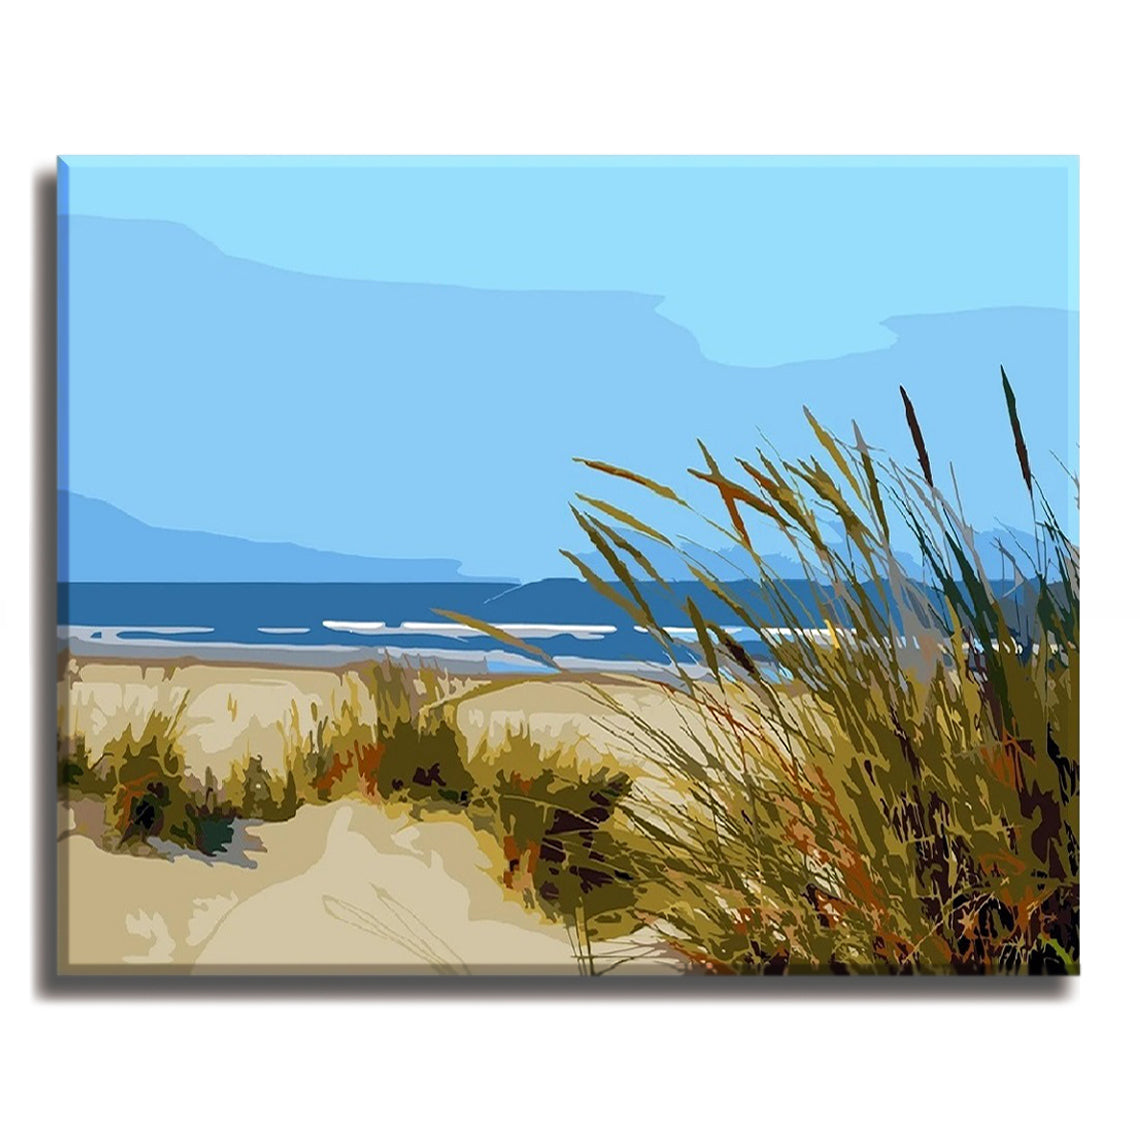 Beach Grass - Paint by Number Kit DIY Oil Painting on Wood Stretched Canvas  16x20